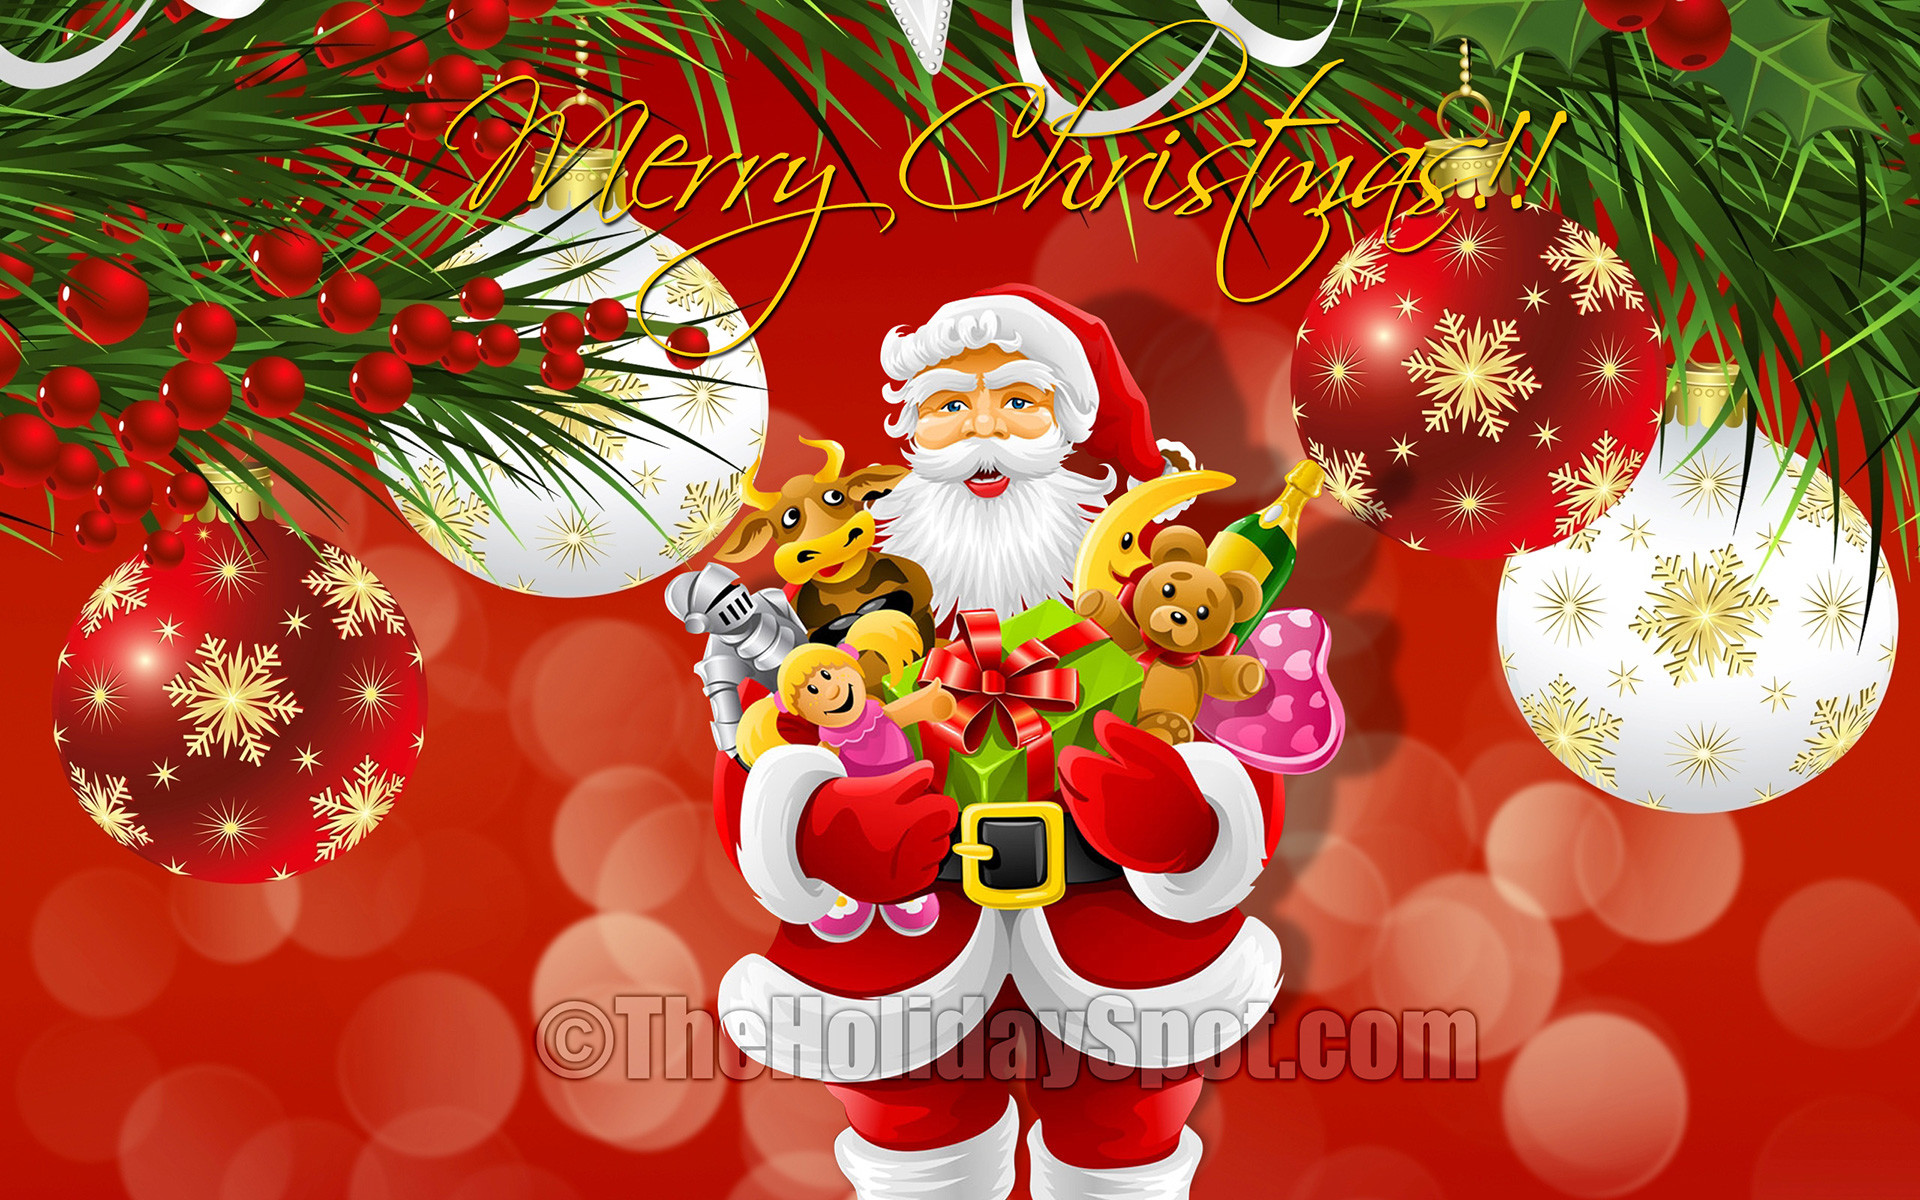 1920x1200, Santa With Toys In Christmas Wallpaper 
 - Happy Christmas Day 2019 - HD Wallpaper 